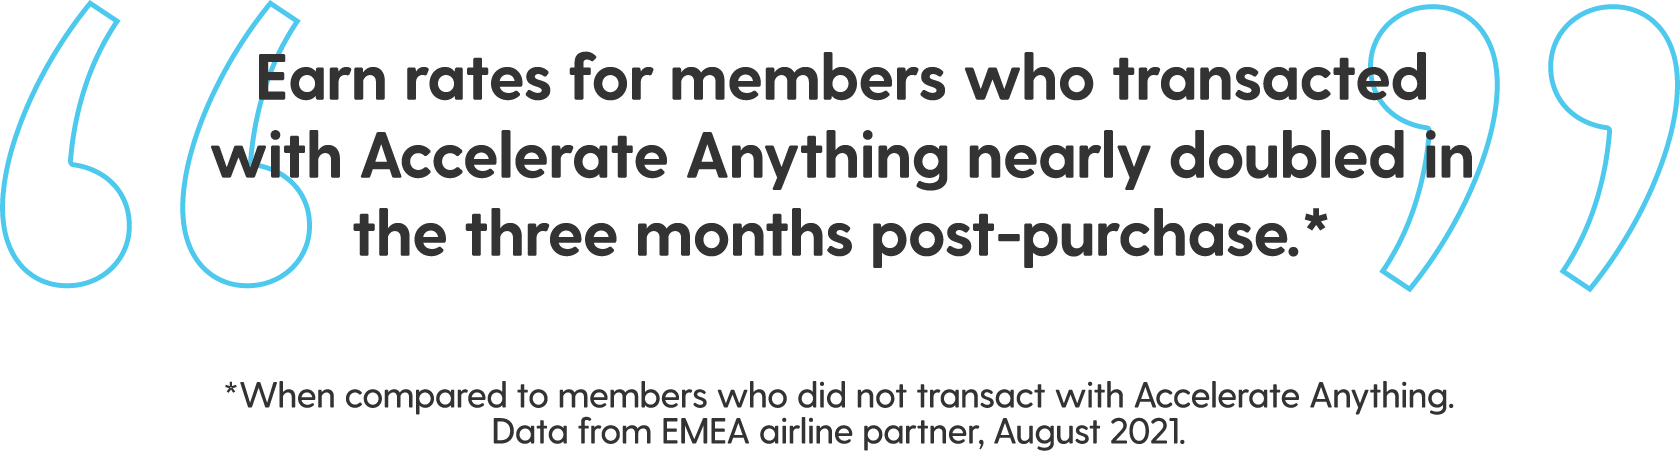 Data quote: Earn rates for members who transacted with Accelerate Anything nearly doubled in the three months post-purchase.*  *When compared to members who did not transact with Accelerate Anything. Data from EMEA airline partner, August 2021.